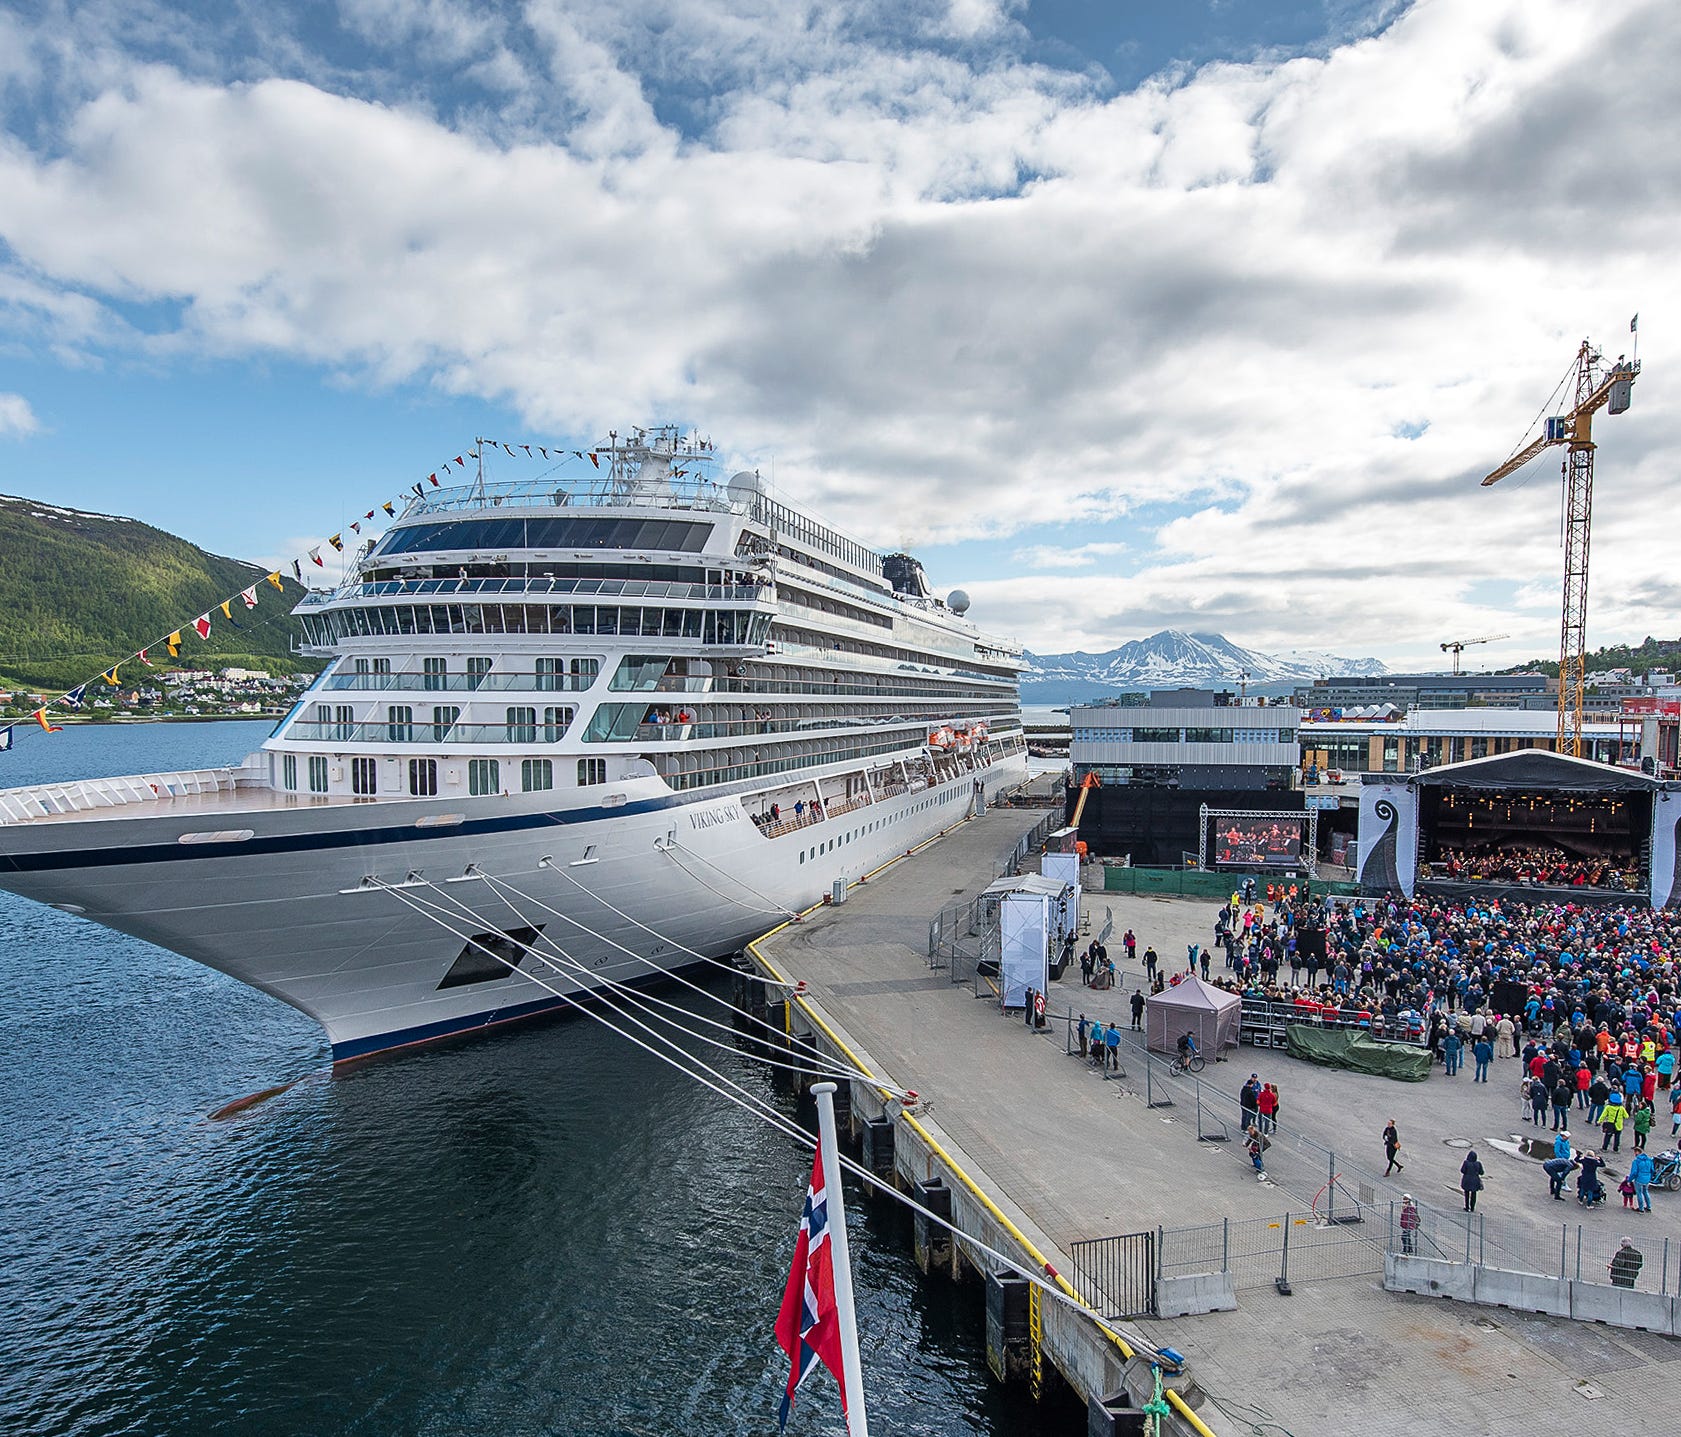 A crowd gathers along the waterfront of Tromso, Norway on June 22, 2017 for the christening of Viking Ocean Cruises' newest ship, Viking Sky.